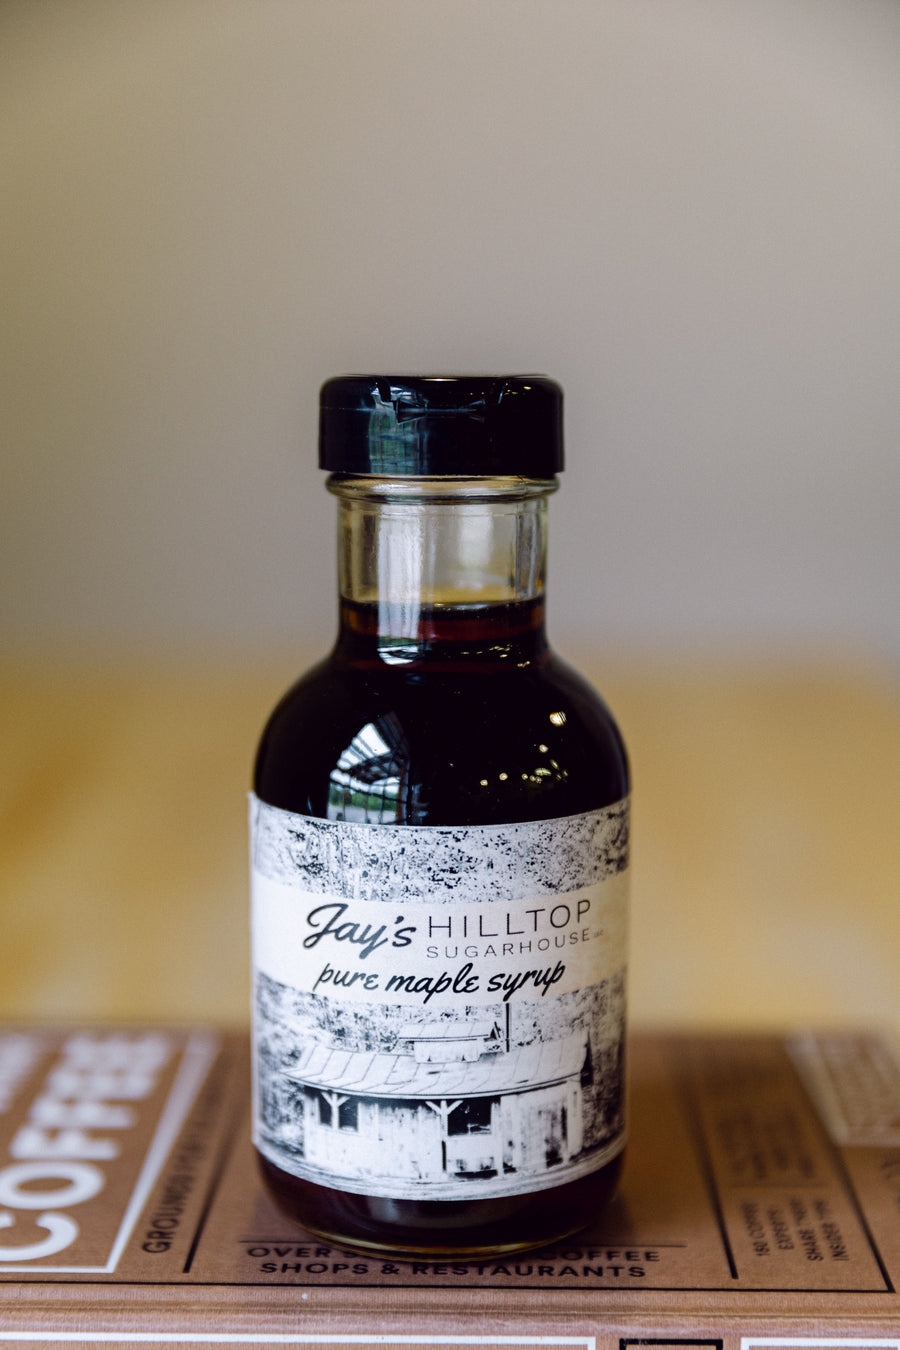 Jay's Hilltop Sugarhouse Maple Syrup